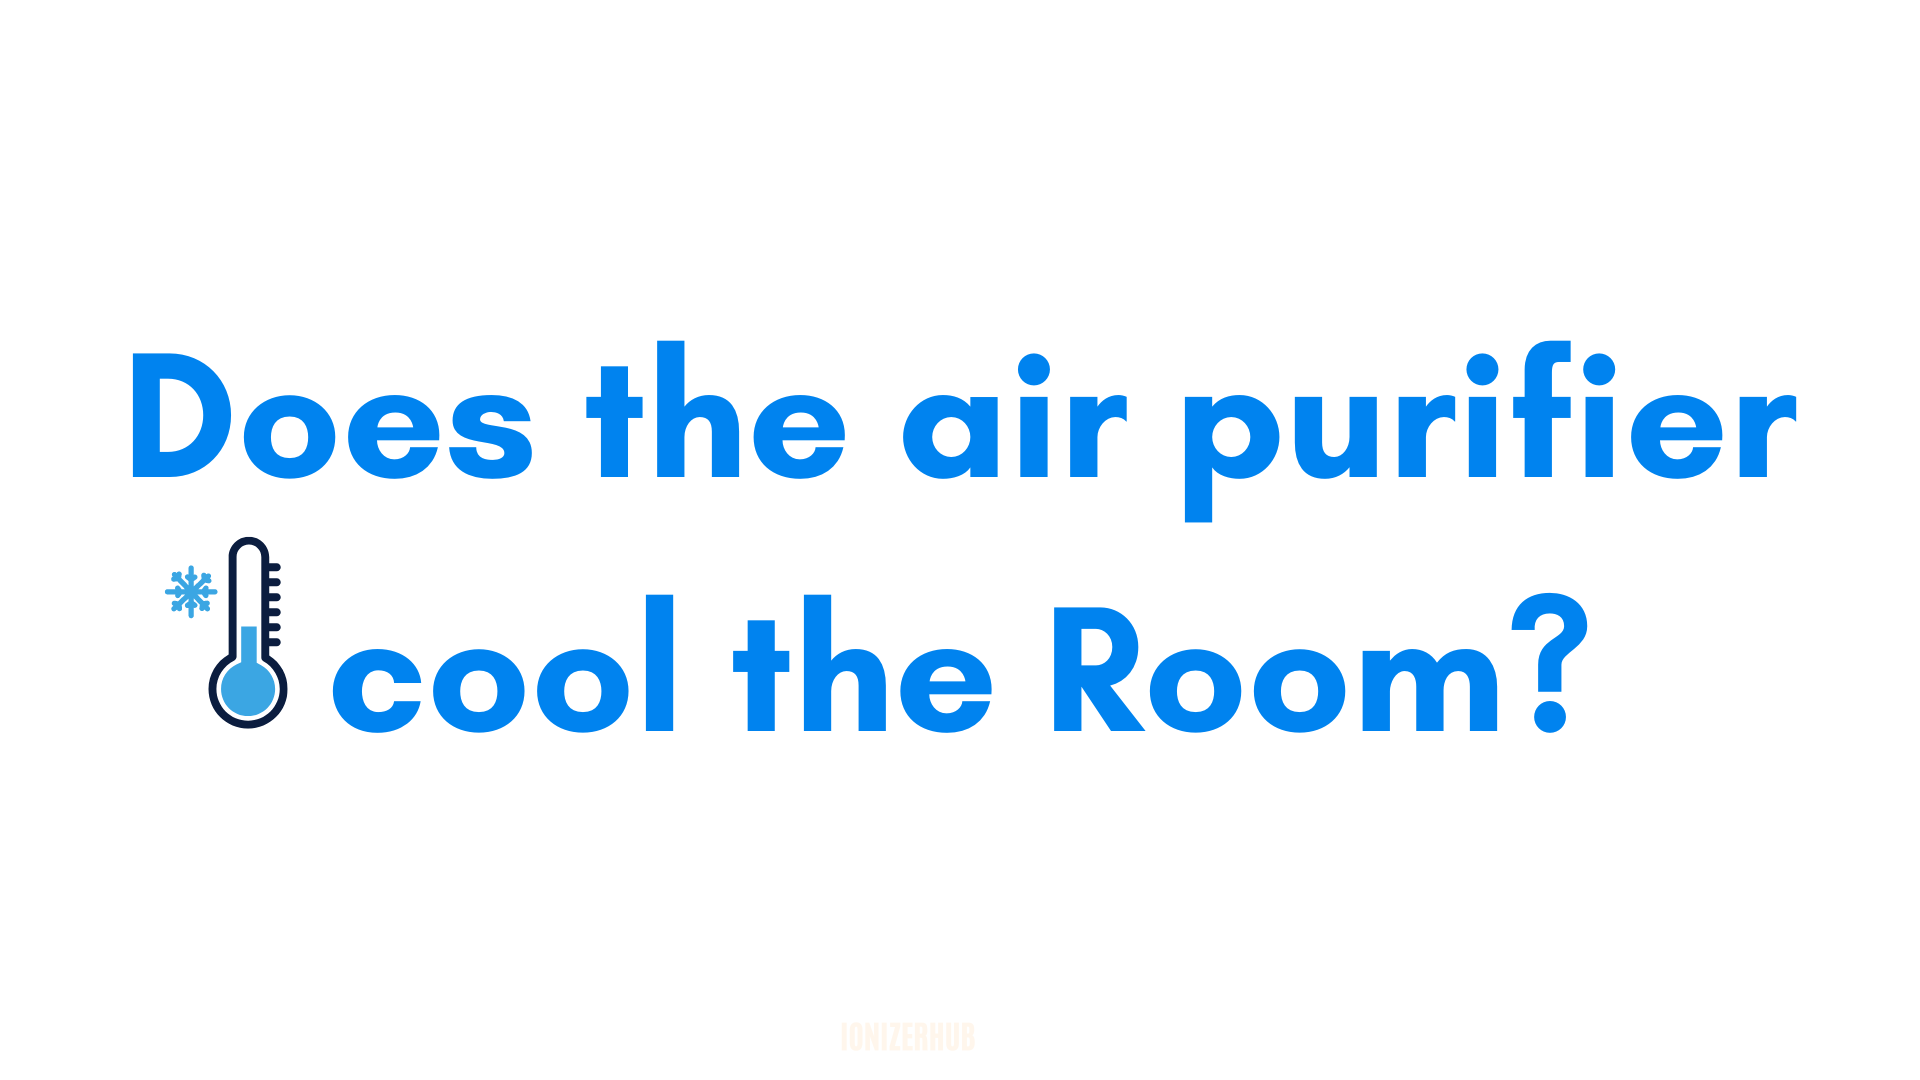 air purifier cool the Room ?